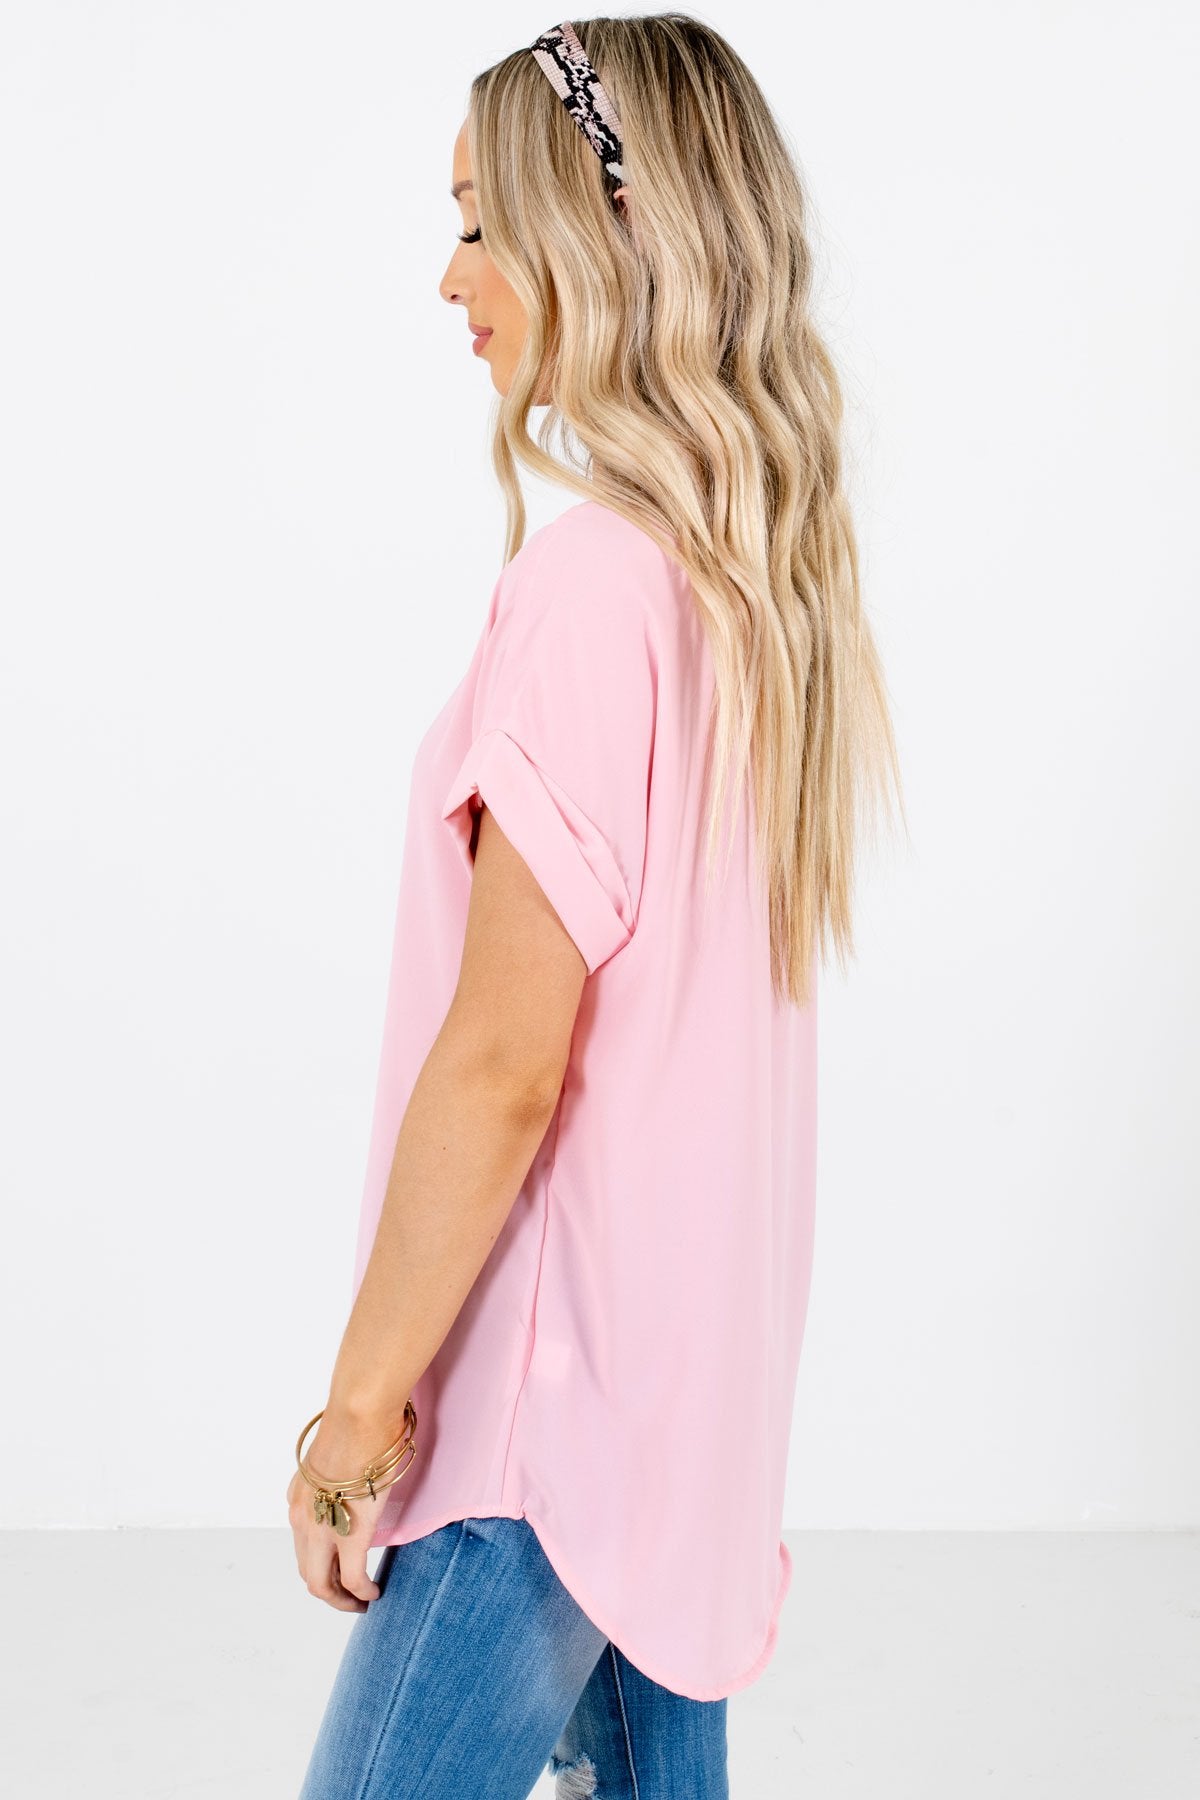 Dusty Pink Layering Boutique Blouses for Women